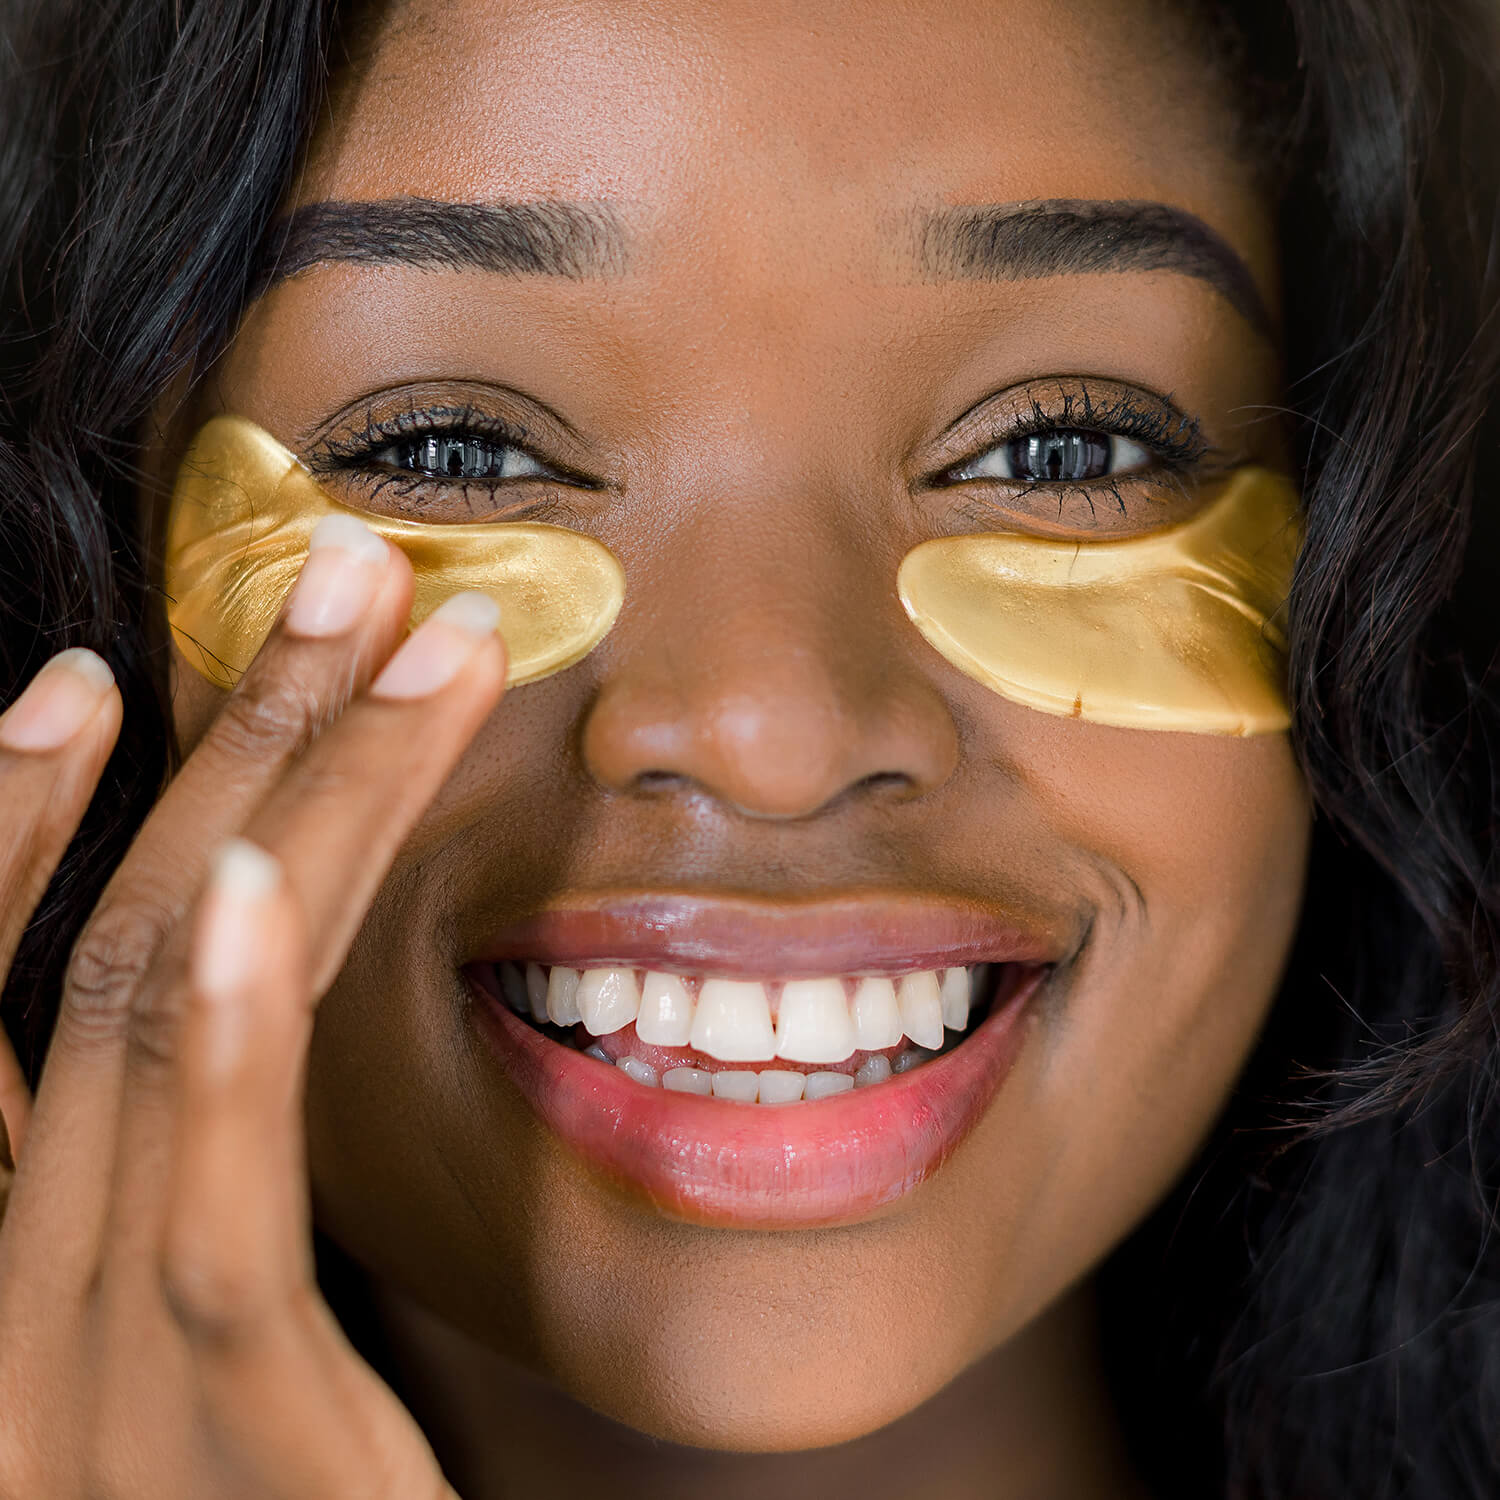 Why is Gold Used in Cosmetics?